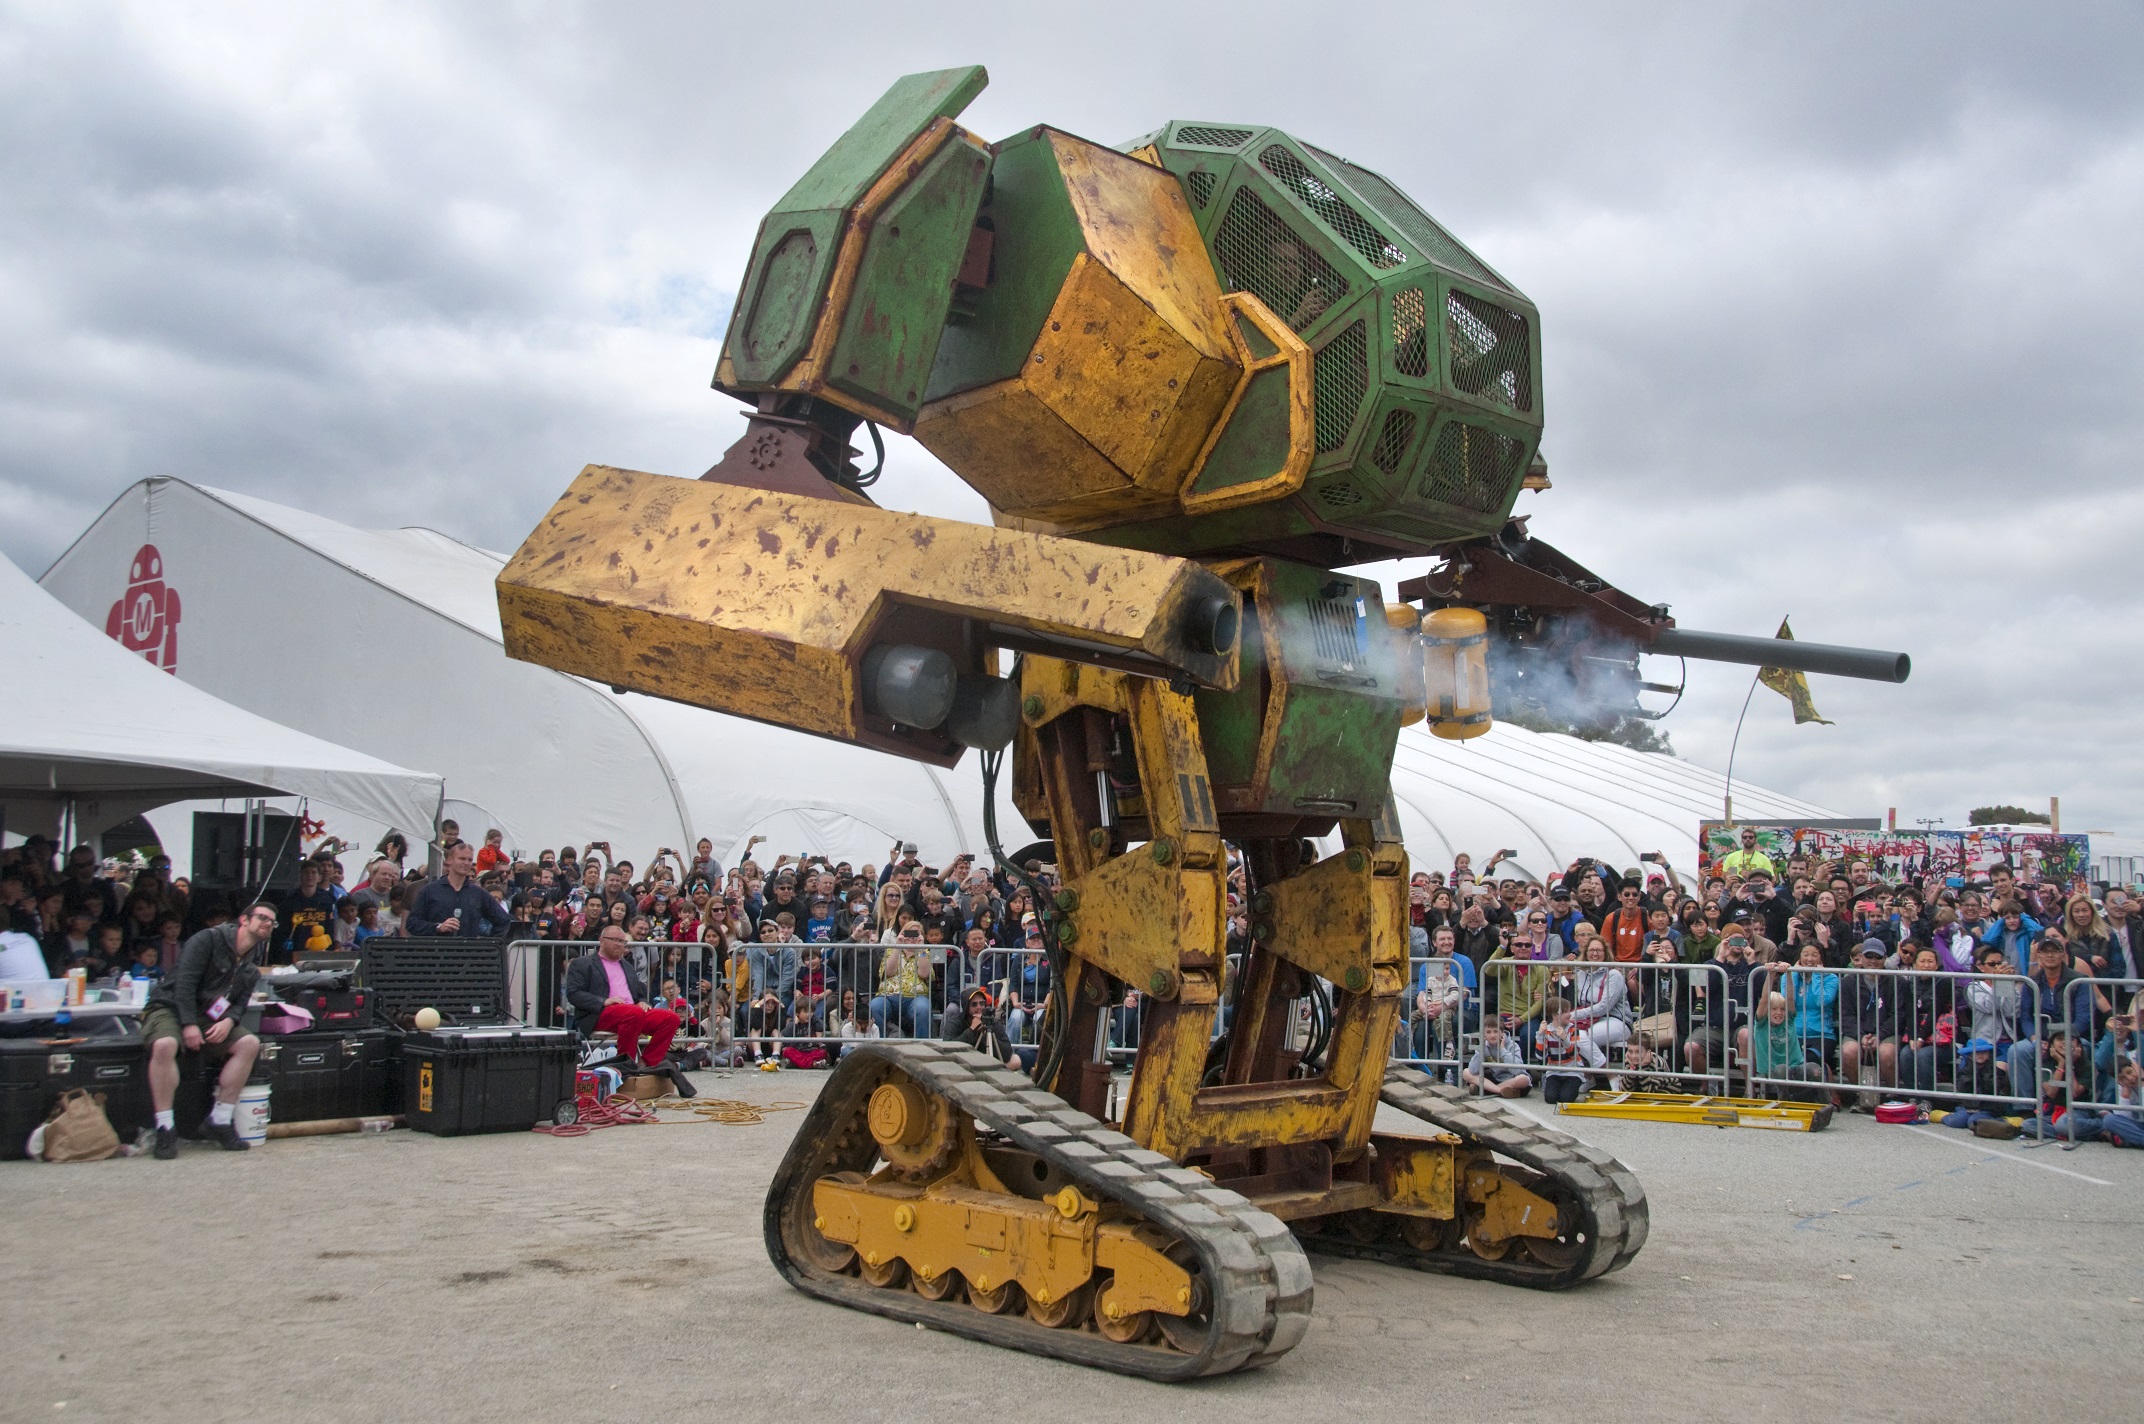 America takes on Japan in terrifying giant mech battle this August